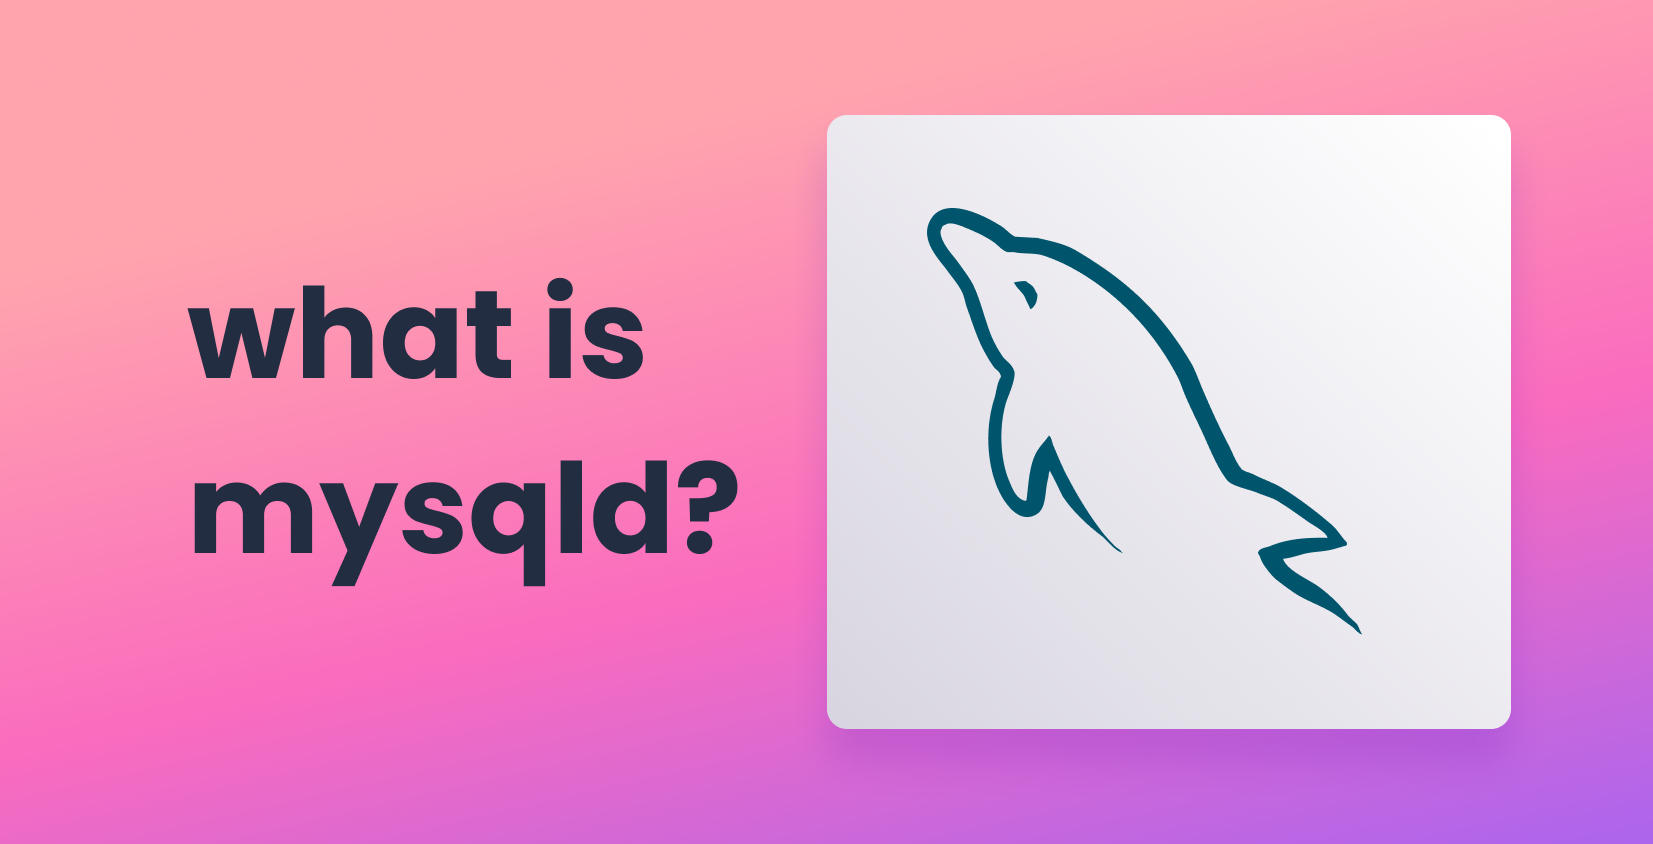 What is mysqld image